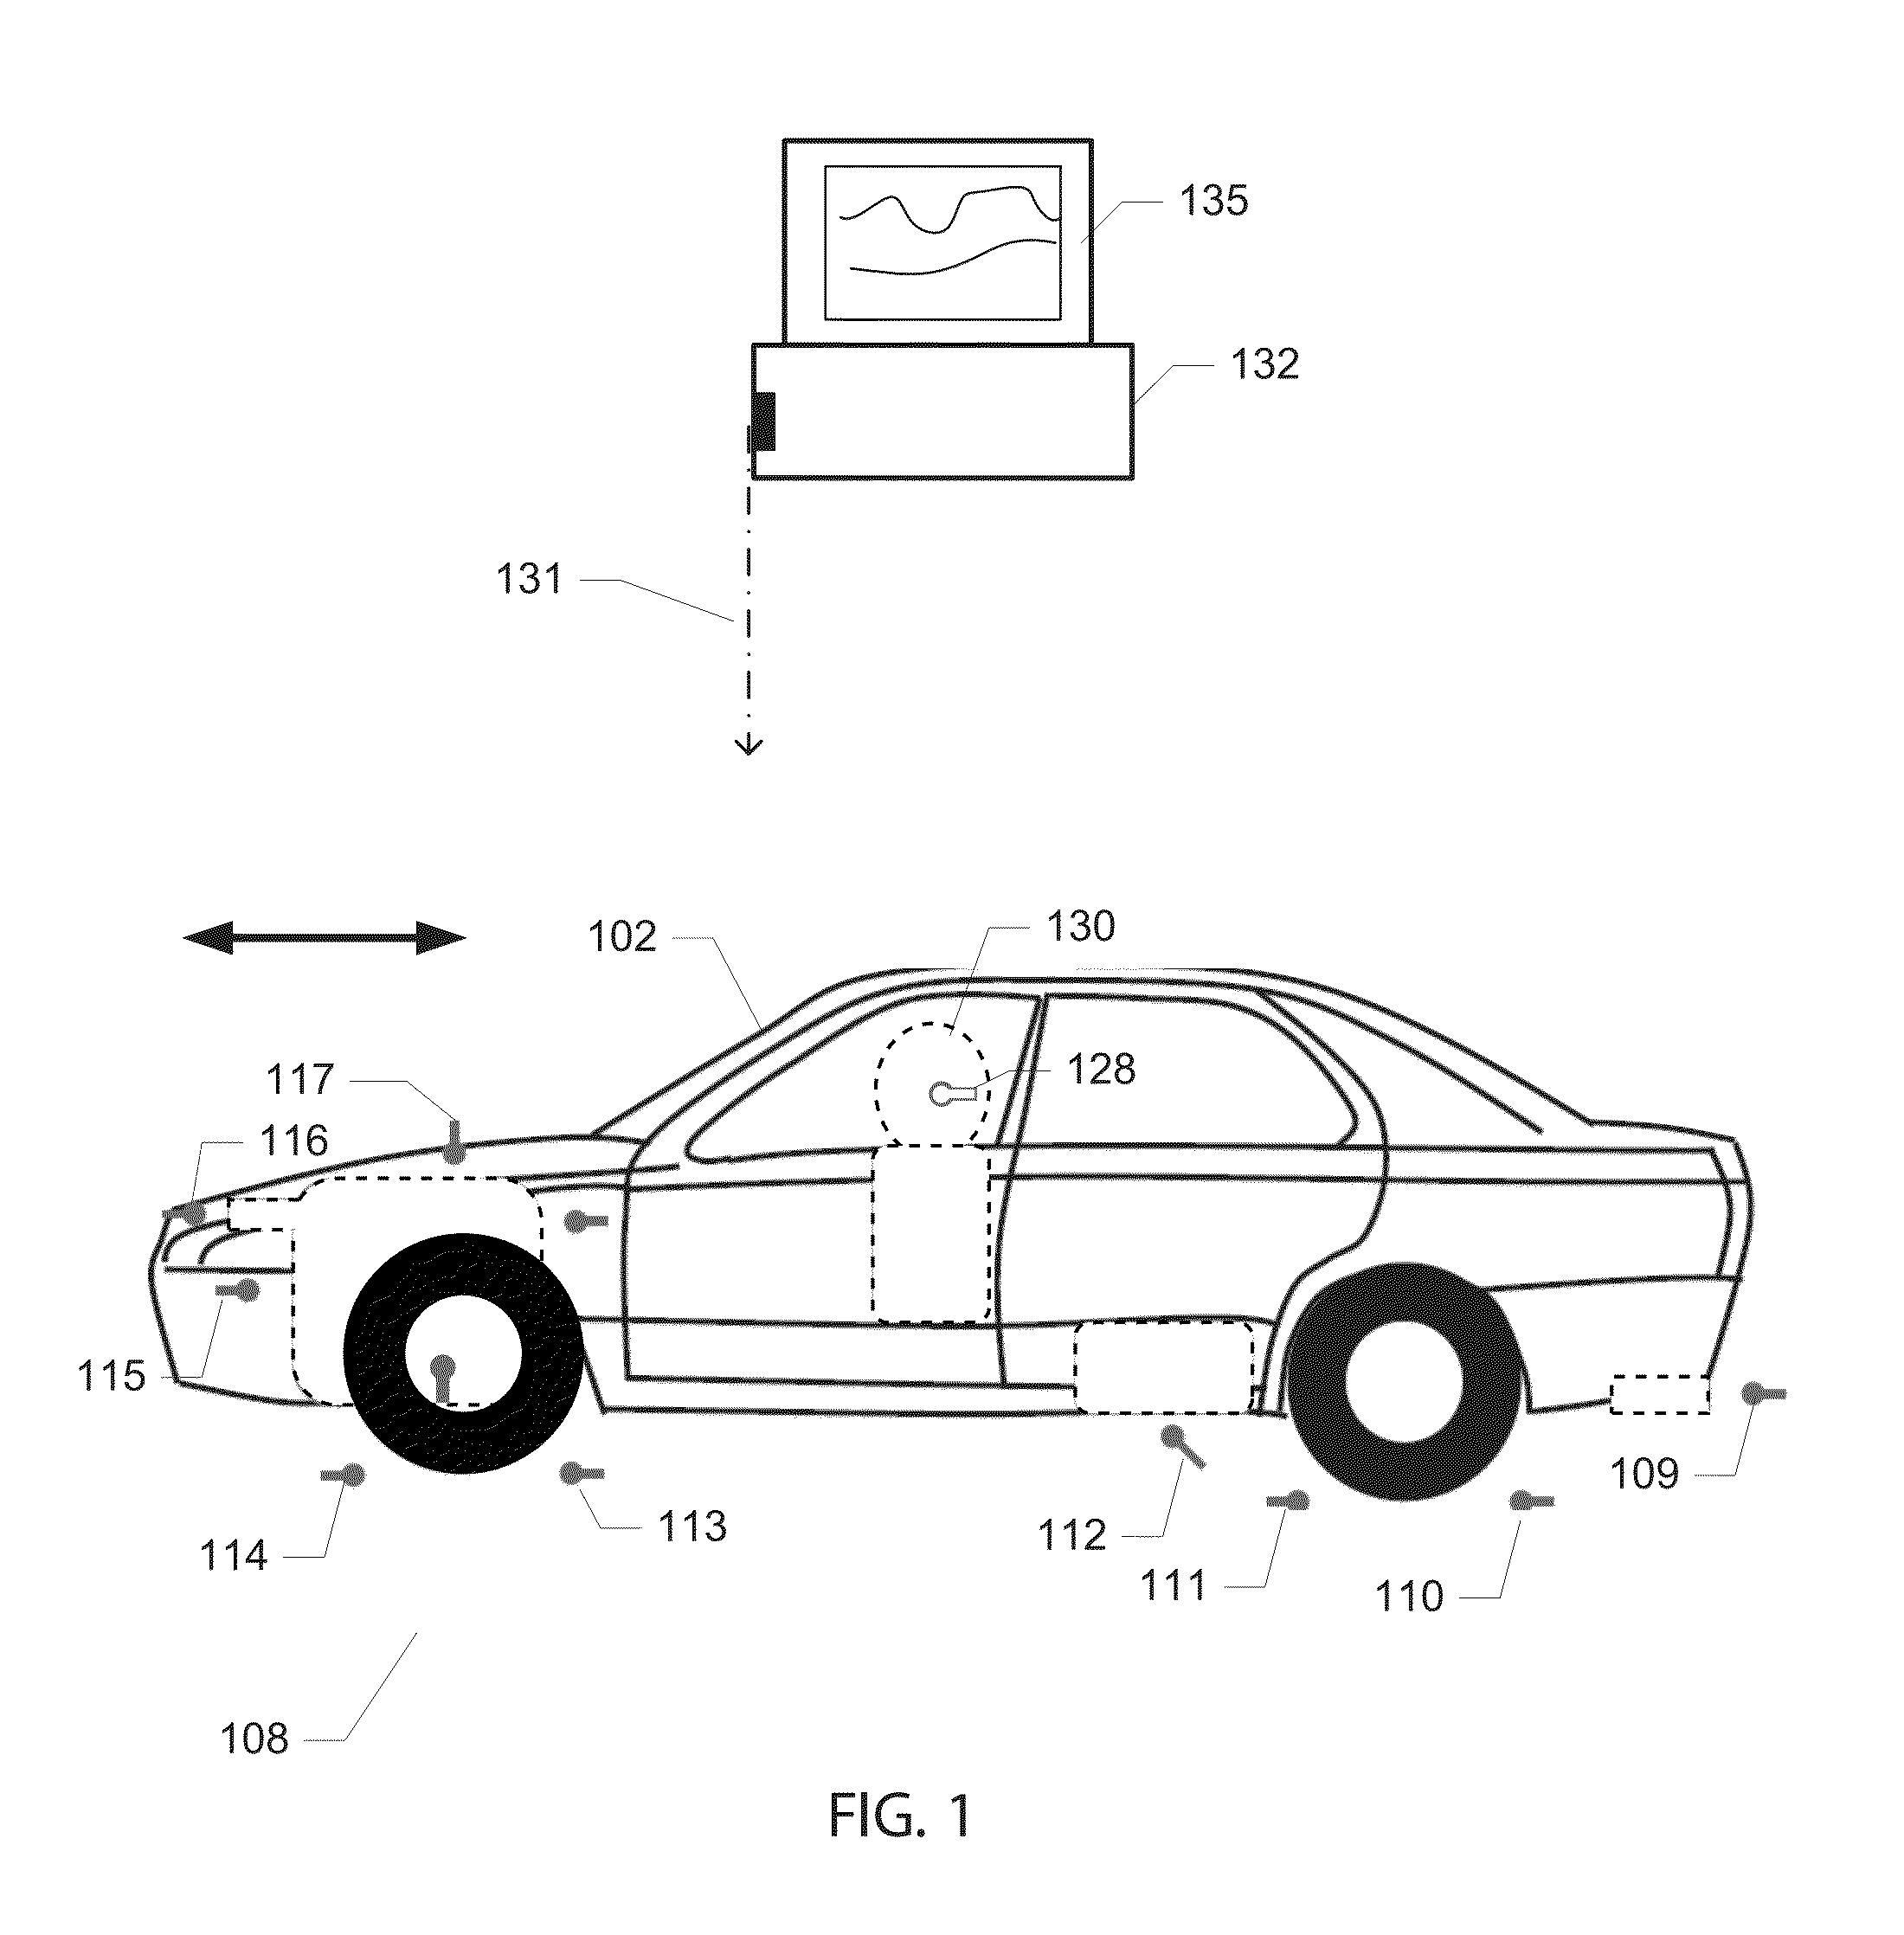 Method of determining noise sound contributions of noise sources of a motorized vehicle